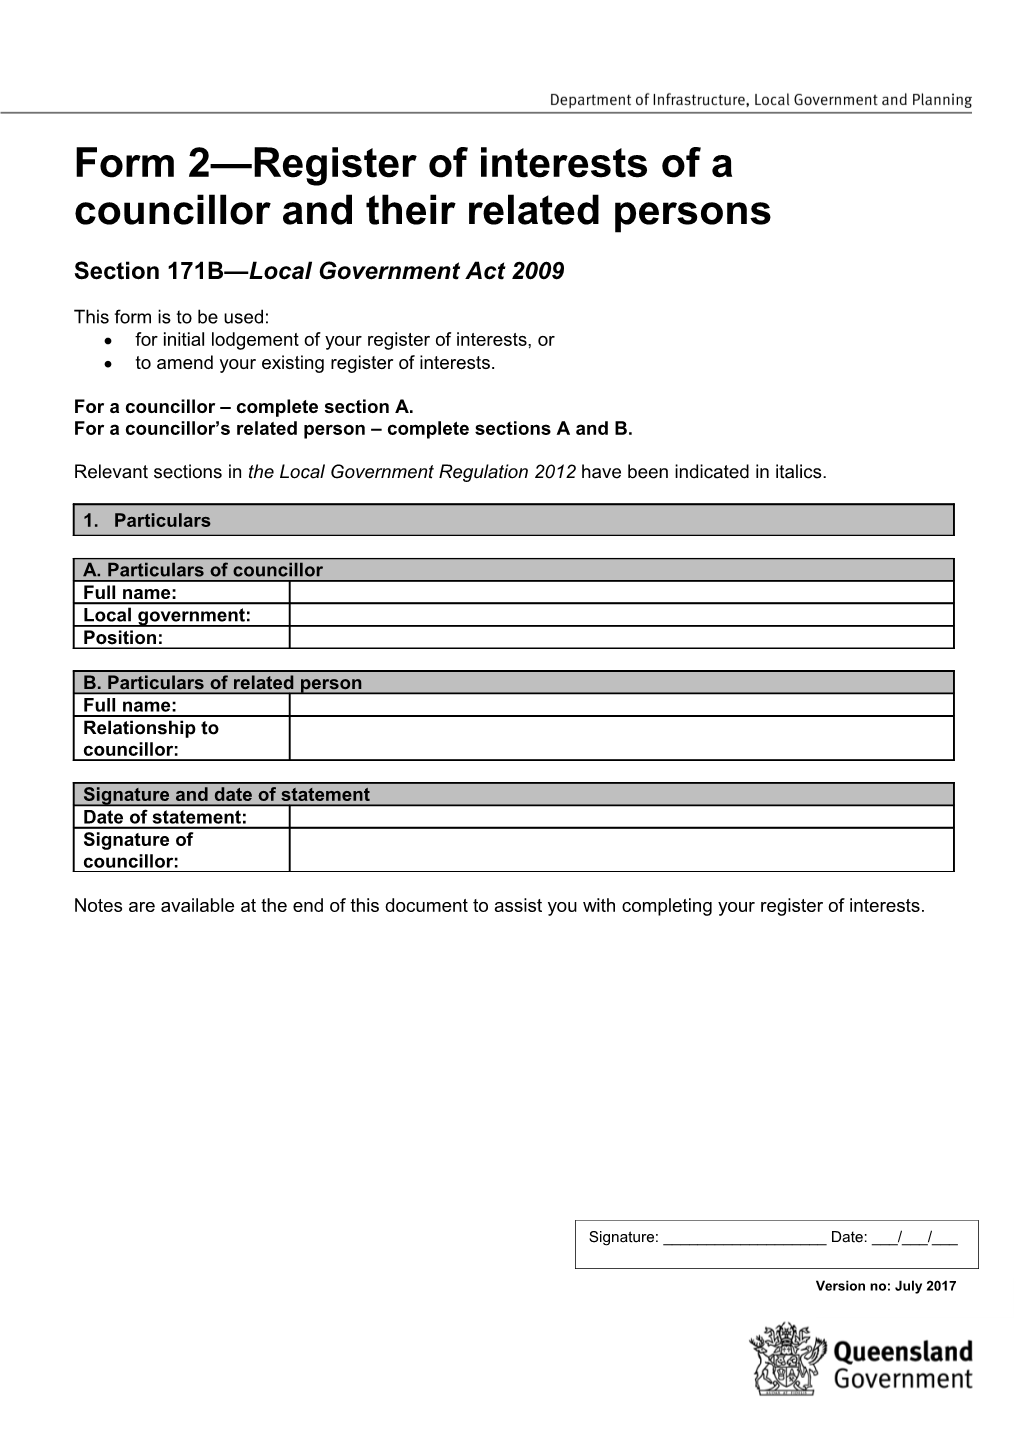 Form 2 - Register of Interests of a Councillor and Their Related Persons